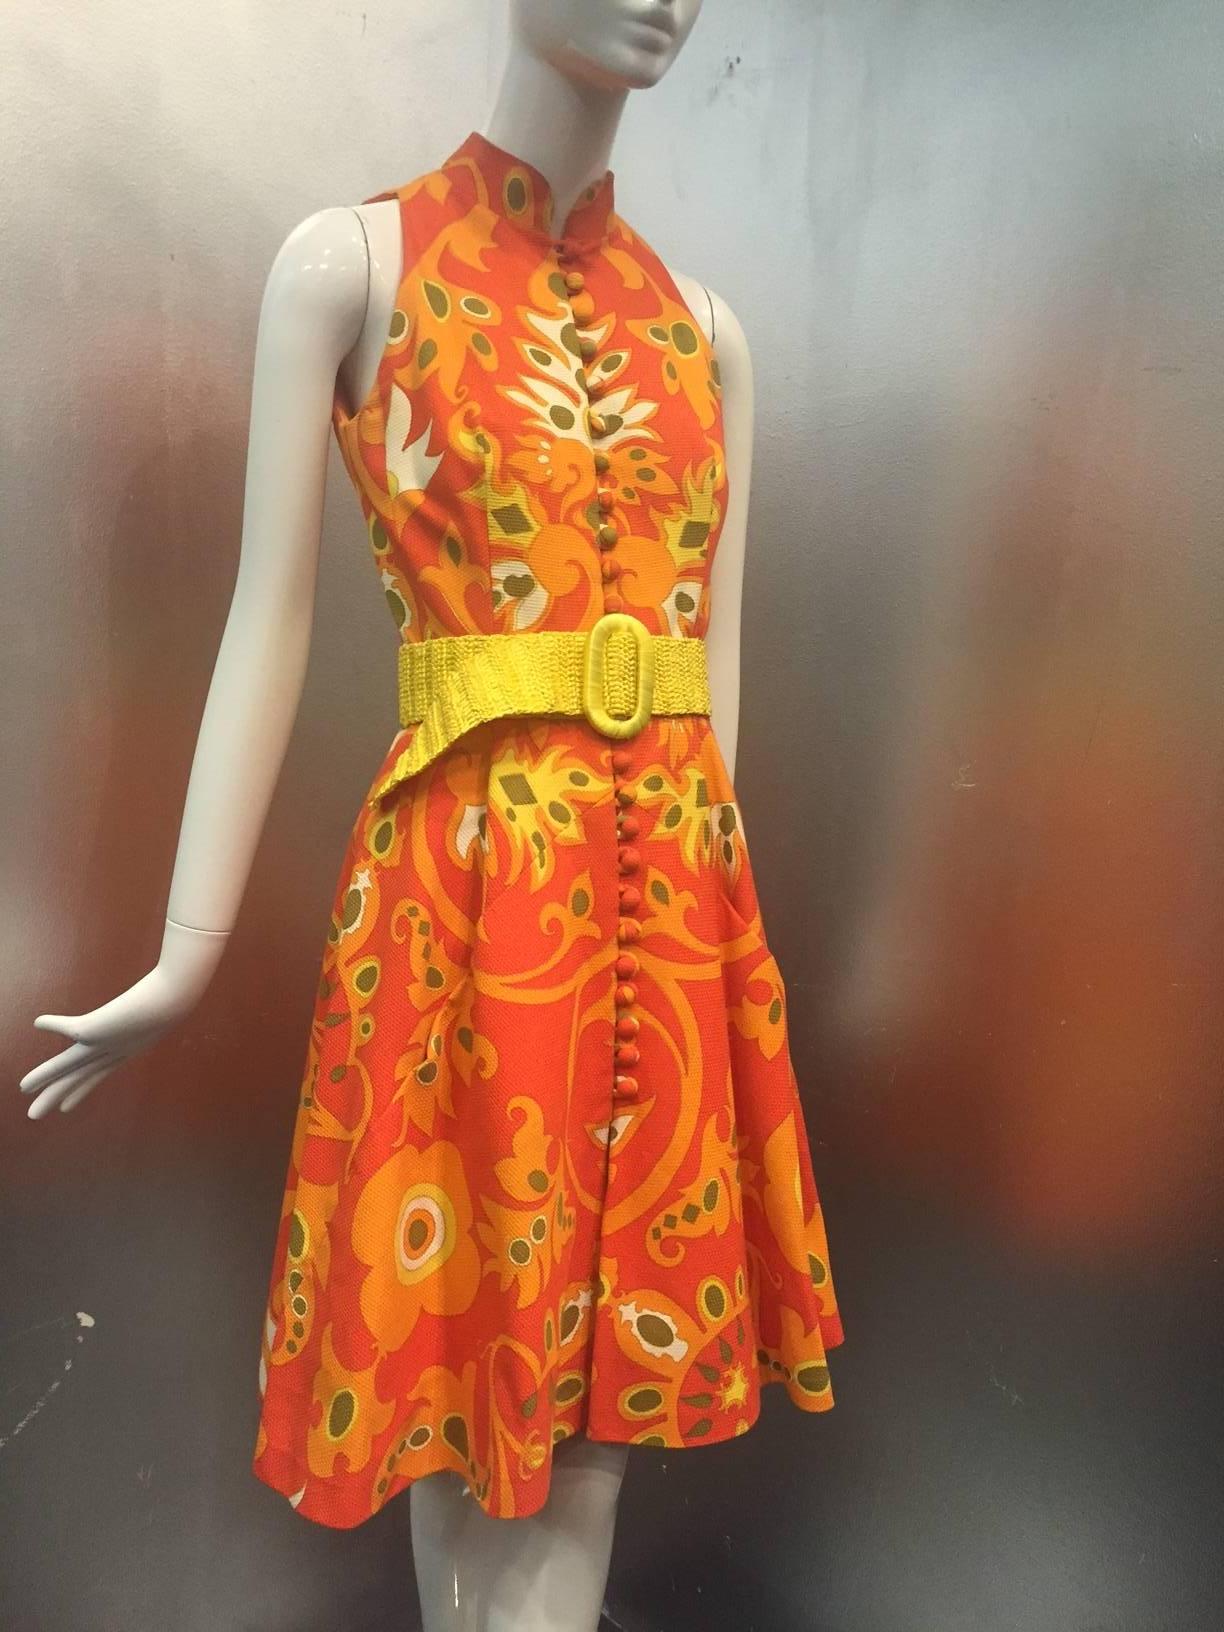 1960s Geoffrey Beene cotton piqué mod mini dress.  Floral Paisley pop-art print. Fitted sleeveless bodice with button and loop closures at front.  Mandarin Collar.  Flared A-Line skirt with pockets built into clever seaming at front.  